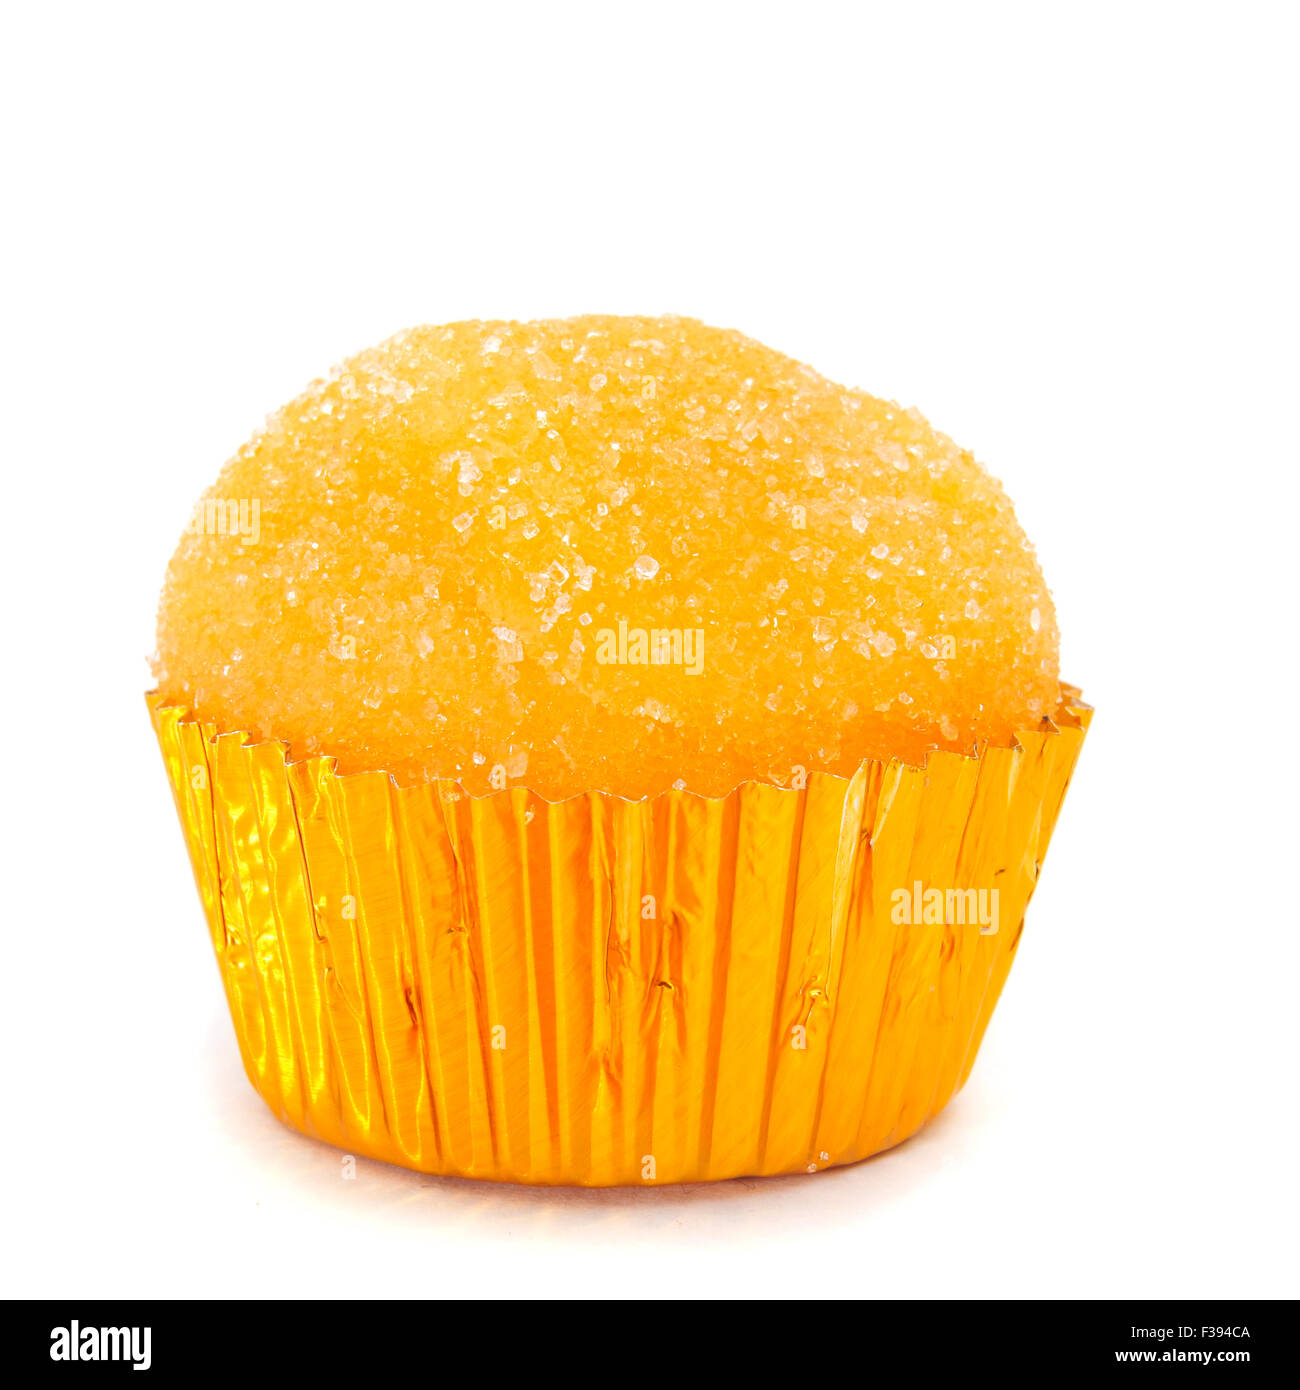 closeup of a yema de santa teresa, a typical confection of Spain, on a white background Stock Photo